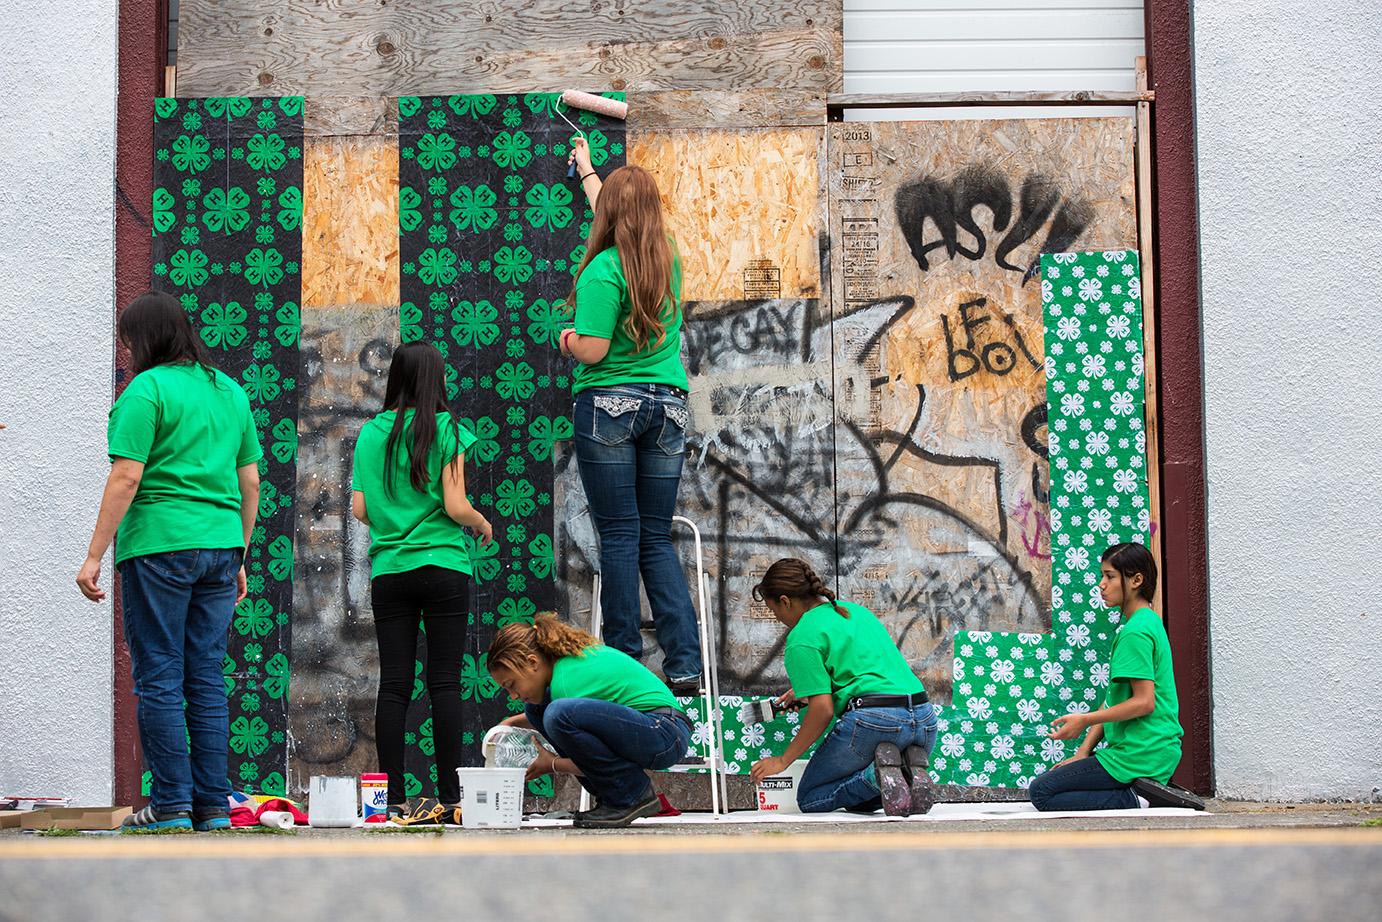 youth covering graffiti as a community service project